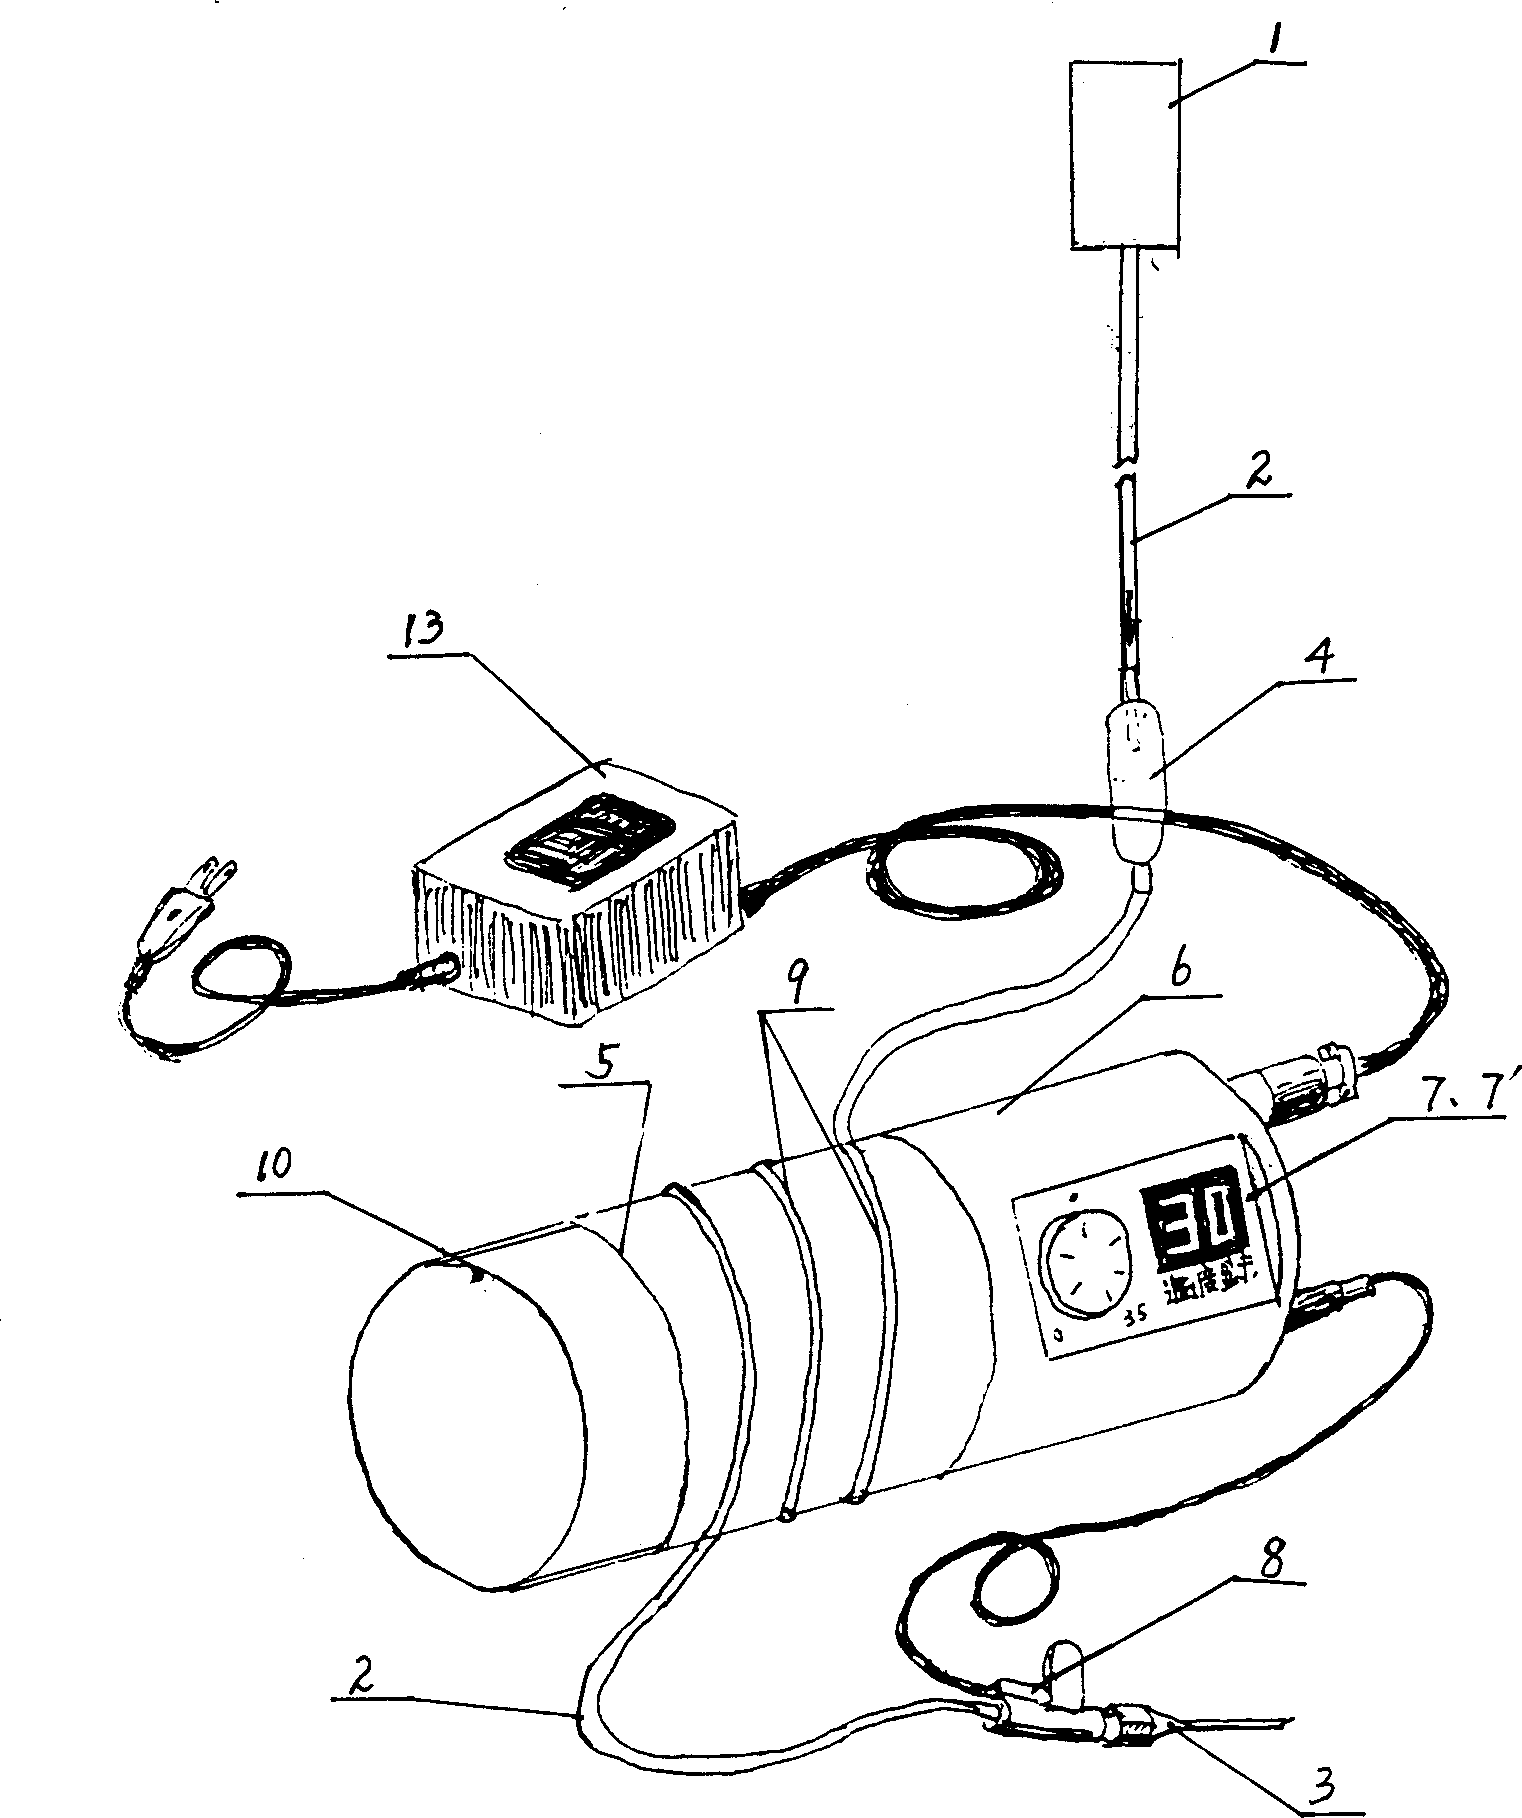 Heating infusion device